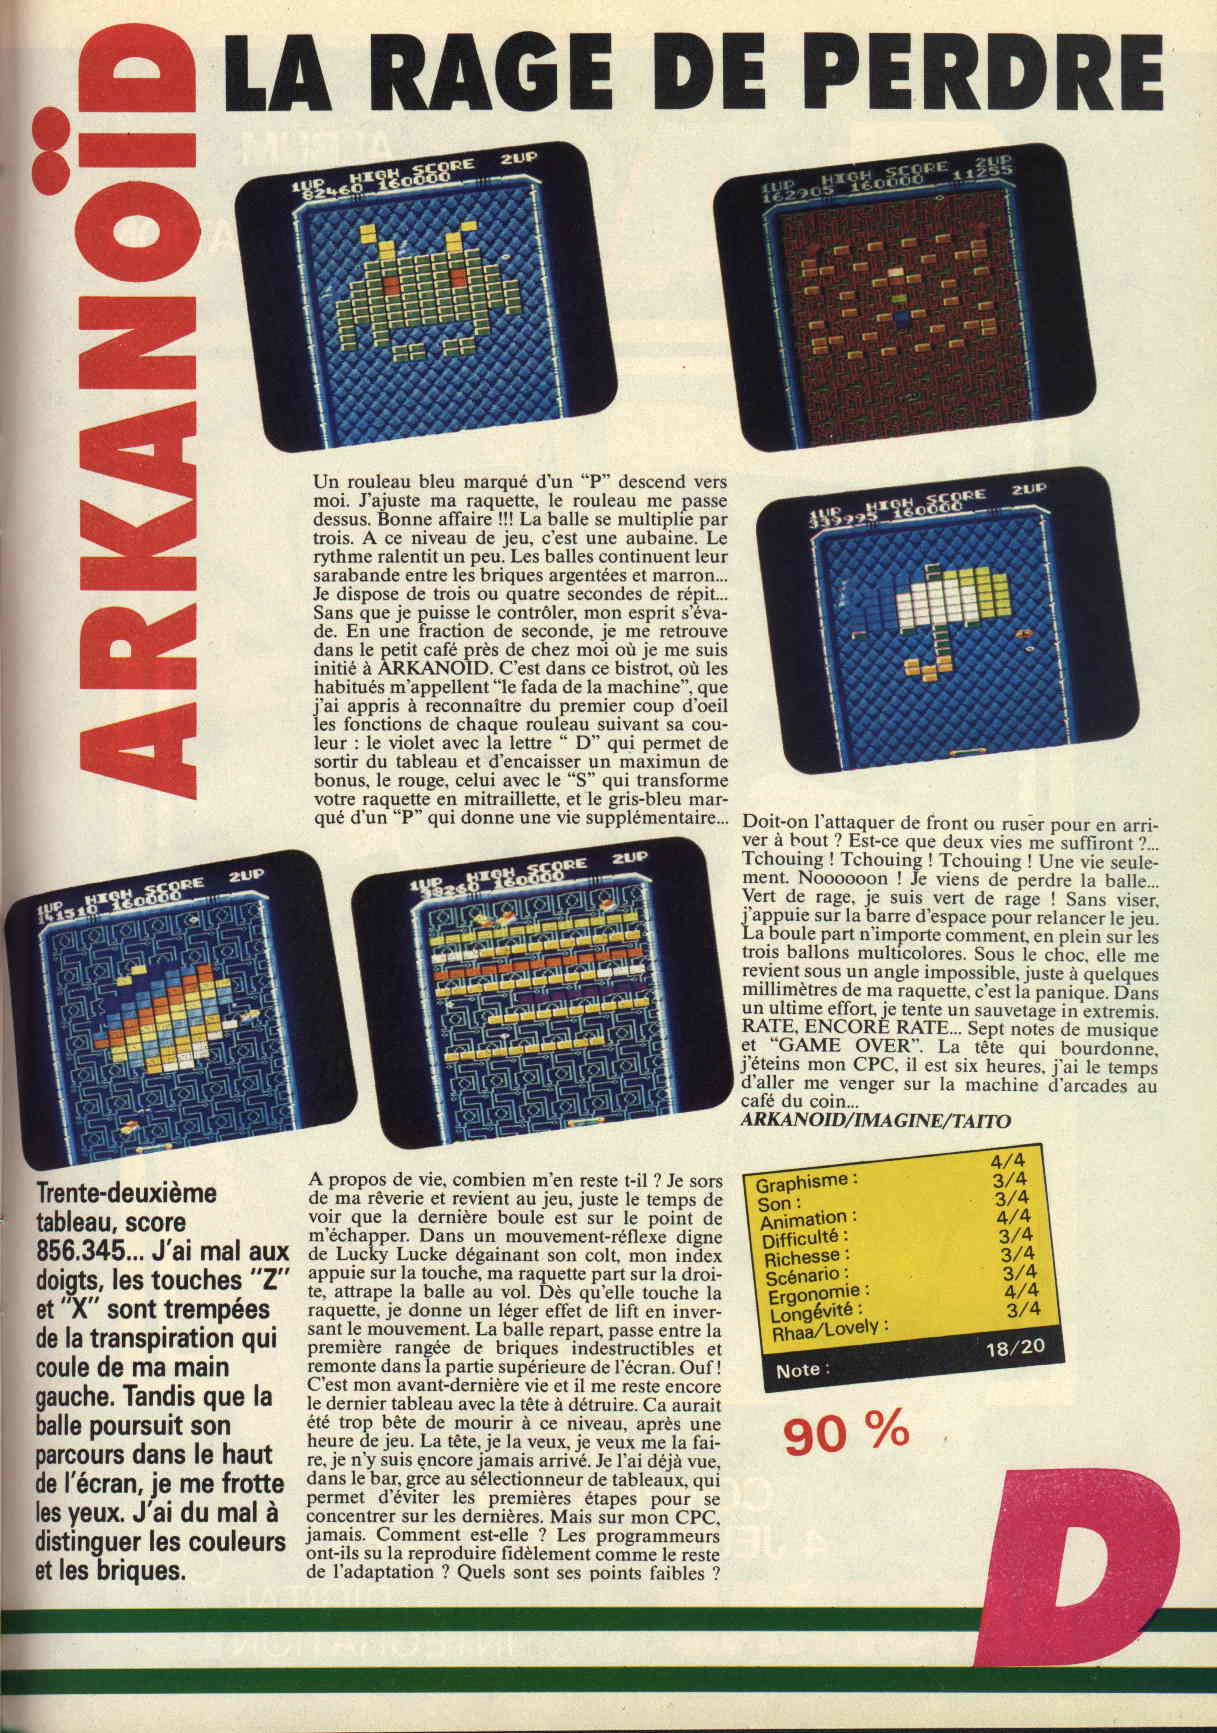 amstrad_100_pour_cent_n_2_marzo_1988.jpg